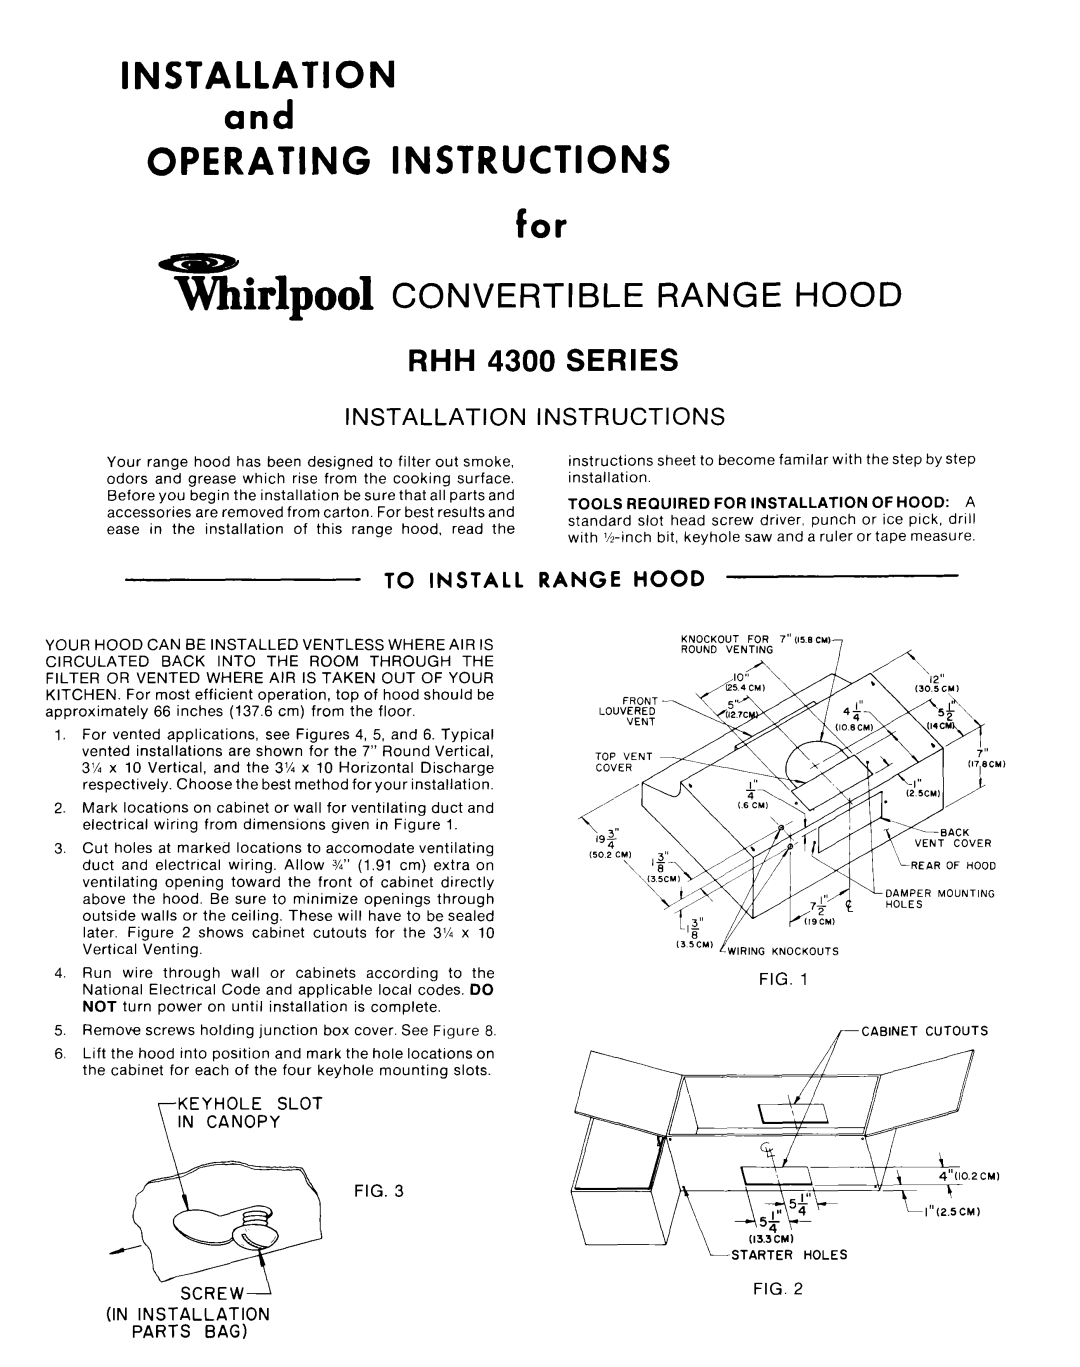 Whirlpool RHH 4300 operating instructions Installation Instructions, To Install Range Hood, f or, Operating Instructions 